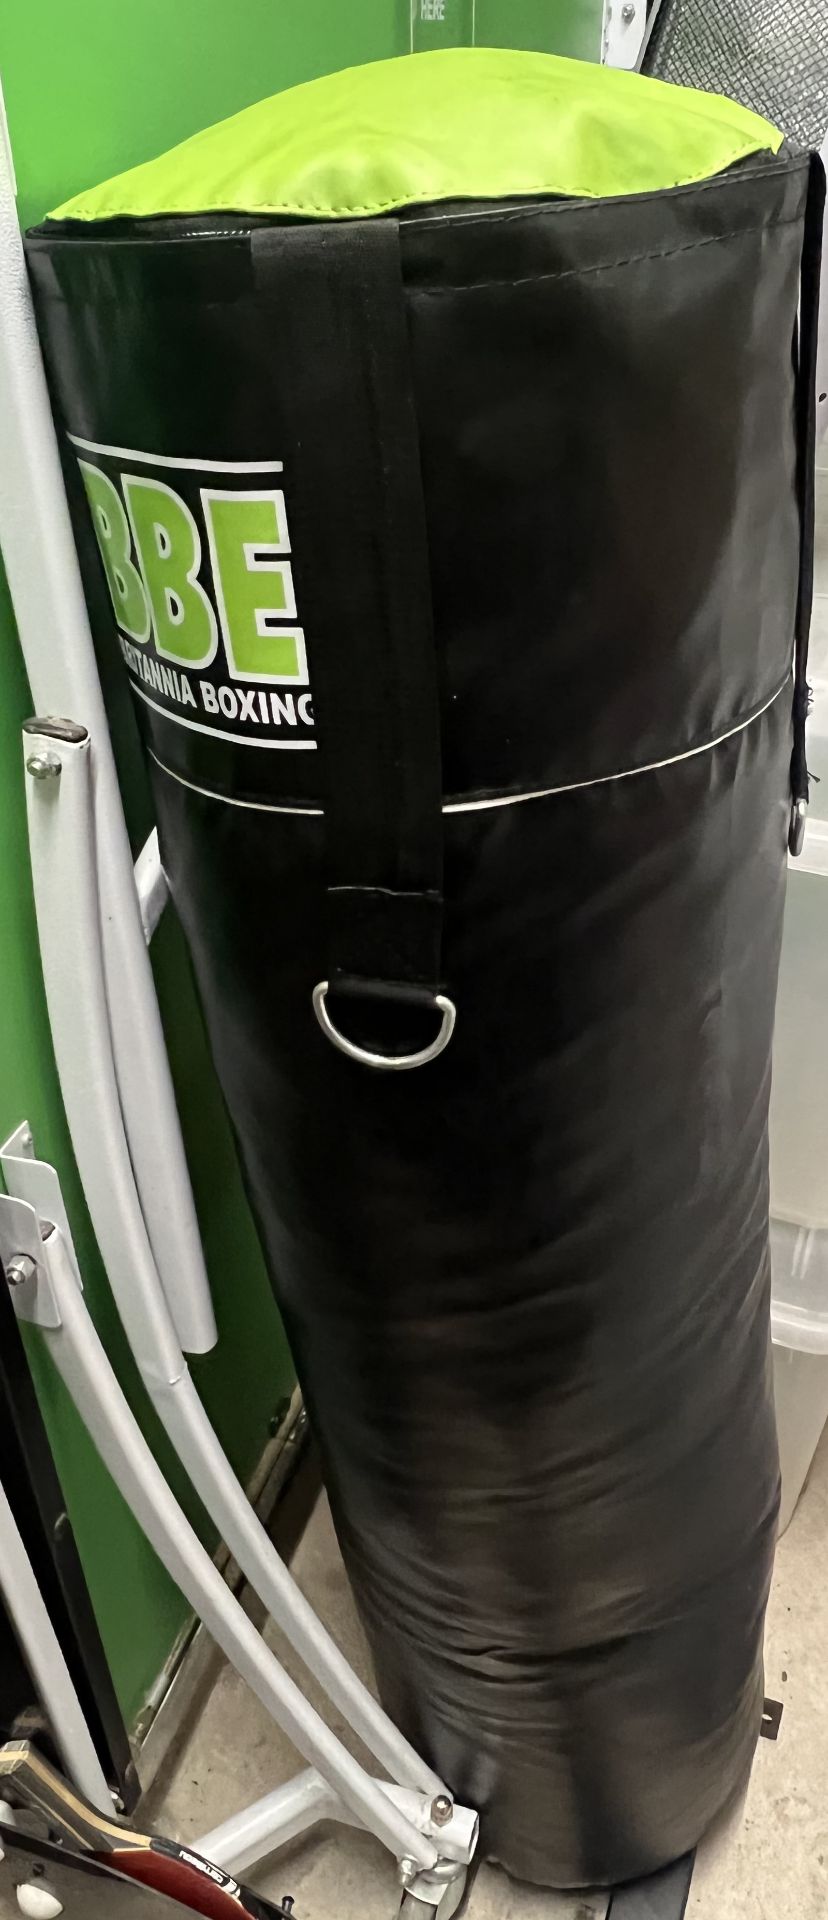 BBE Britannia Boxing Punch Bag - Great Condition - Image 3 of 4